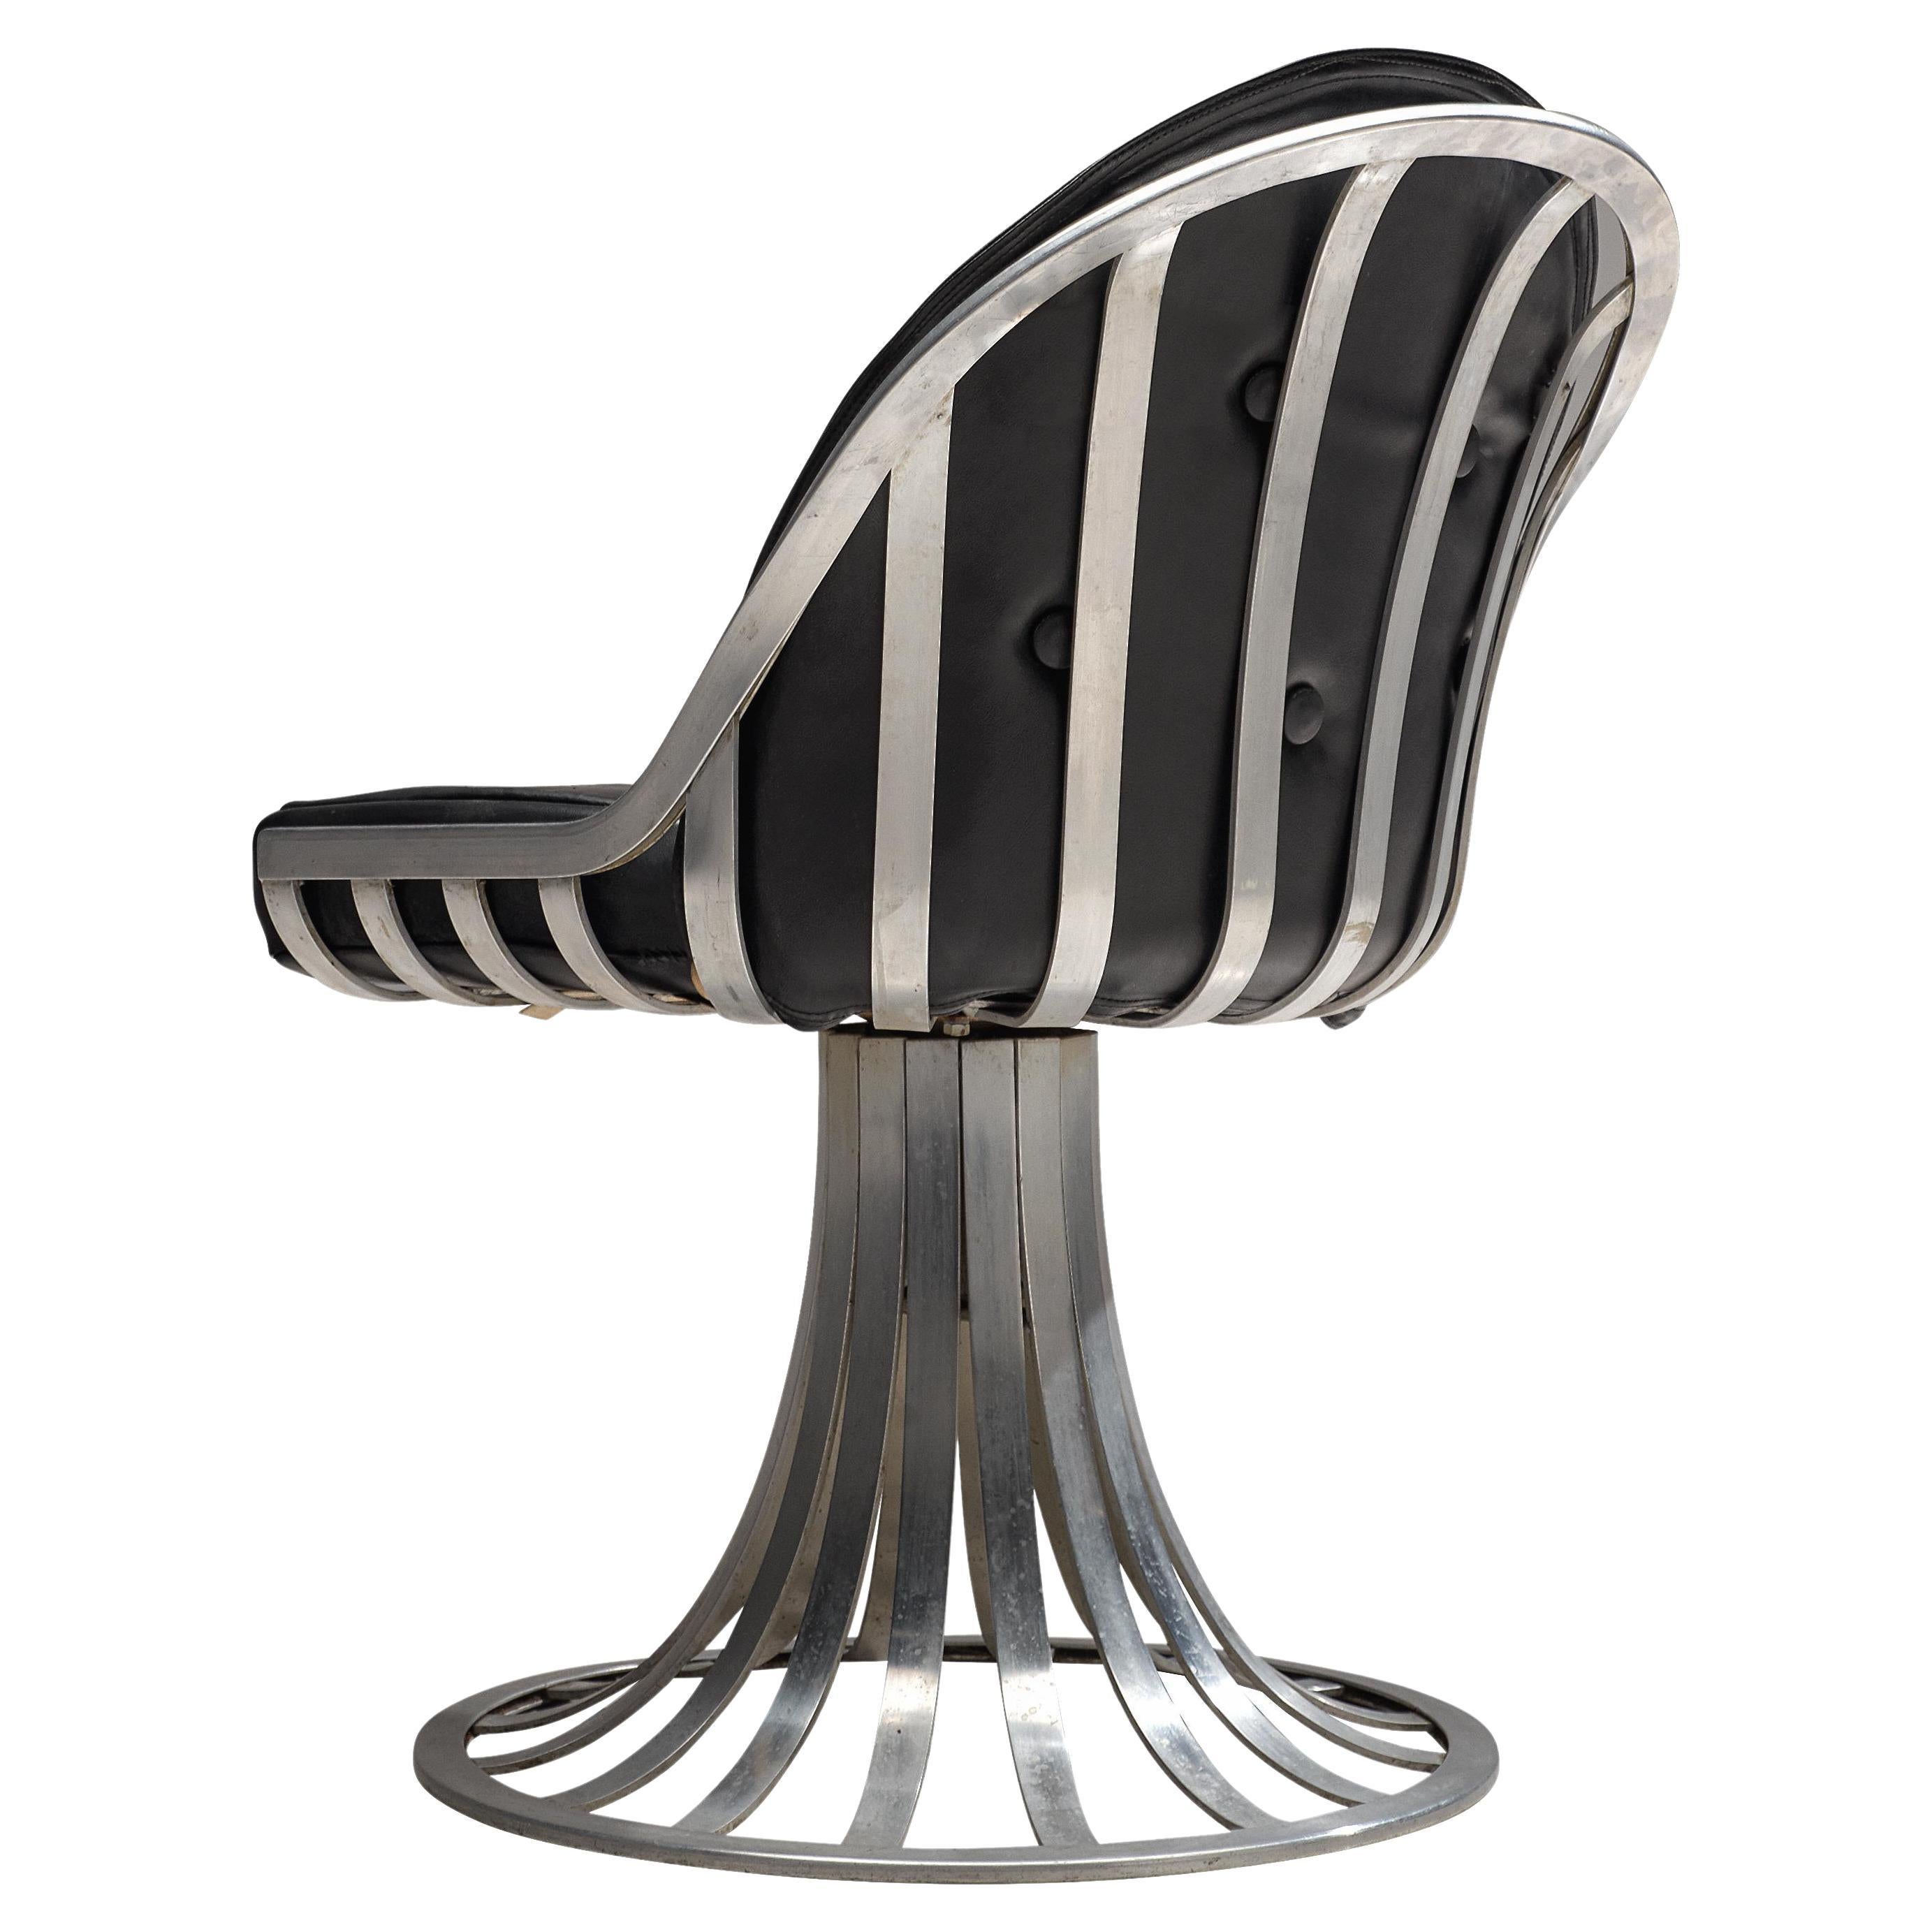 Herbert Saiger Dining Chair in Black Upholstery and Aluminum